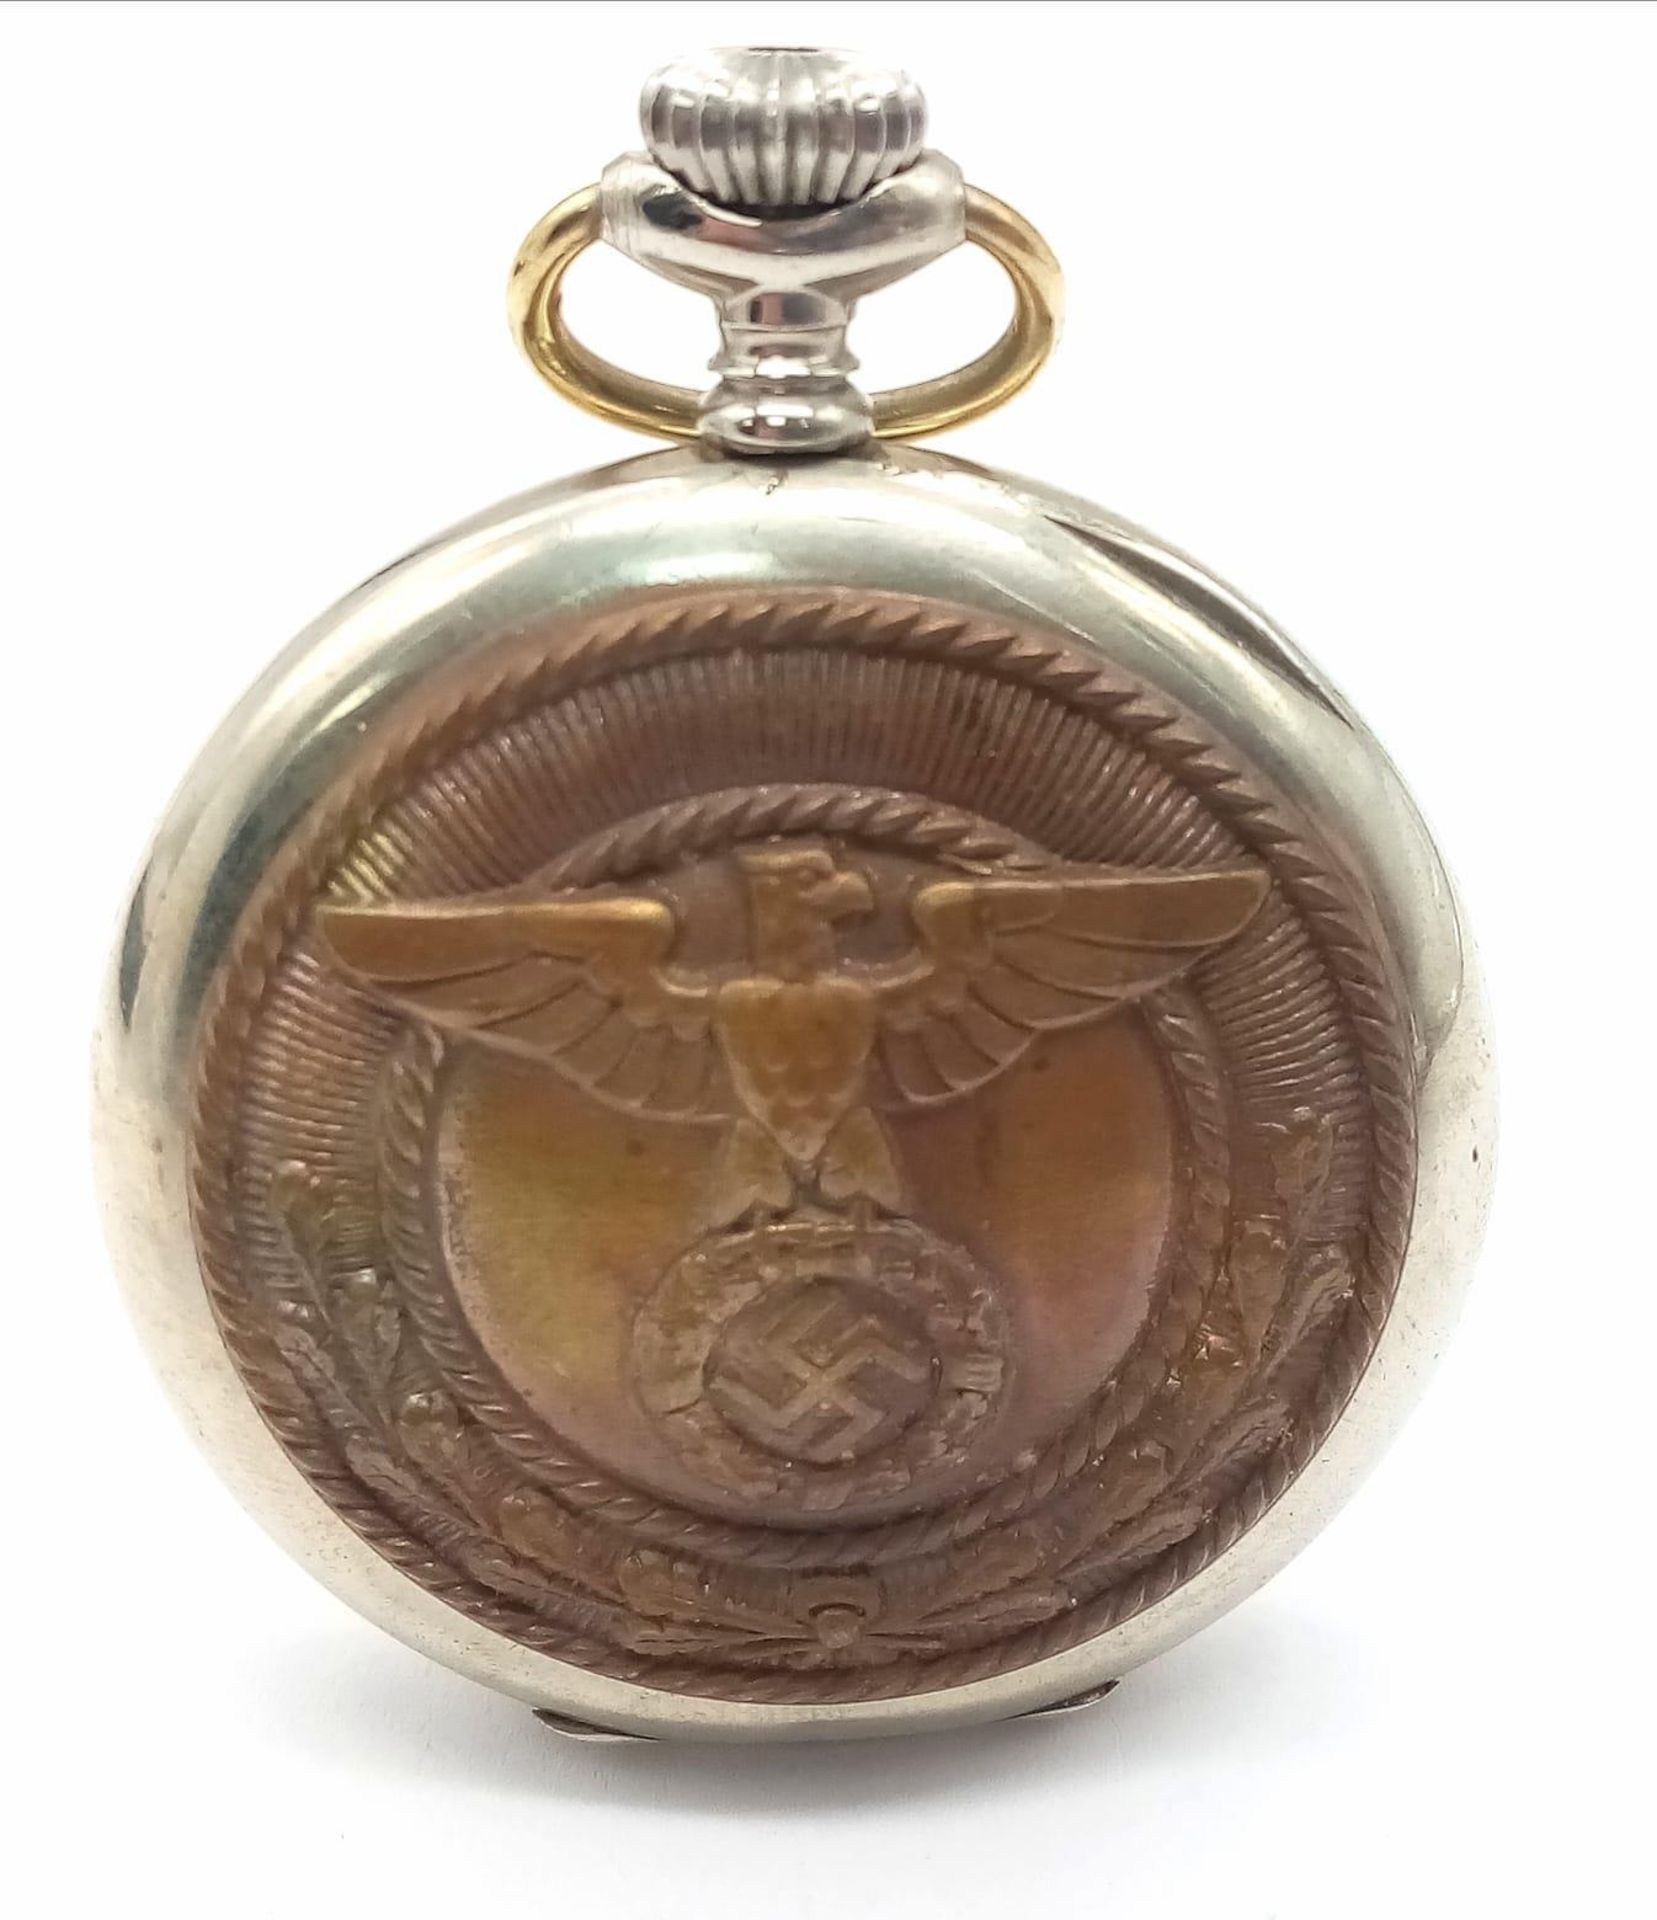 3rd Reich “Brown Shirts” Pocket Watch. 1930’s Swiss Made Pocket Watch with the buckle centre from - Image 2 of 6